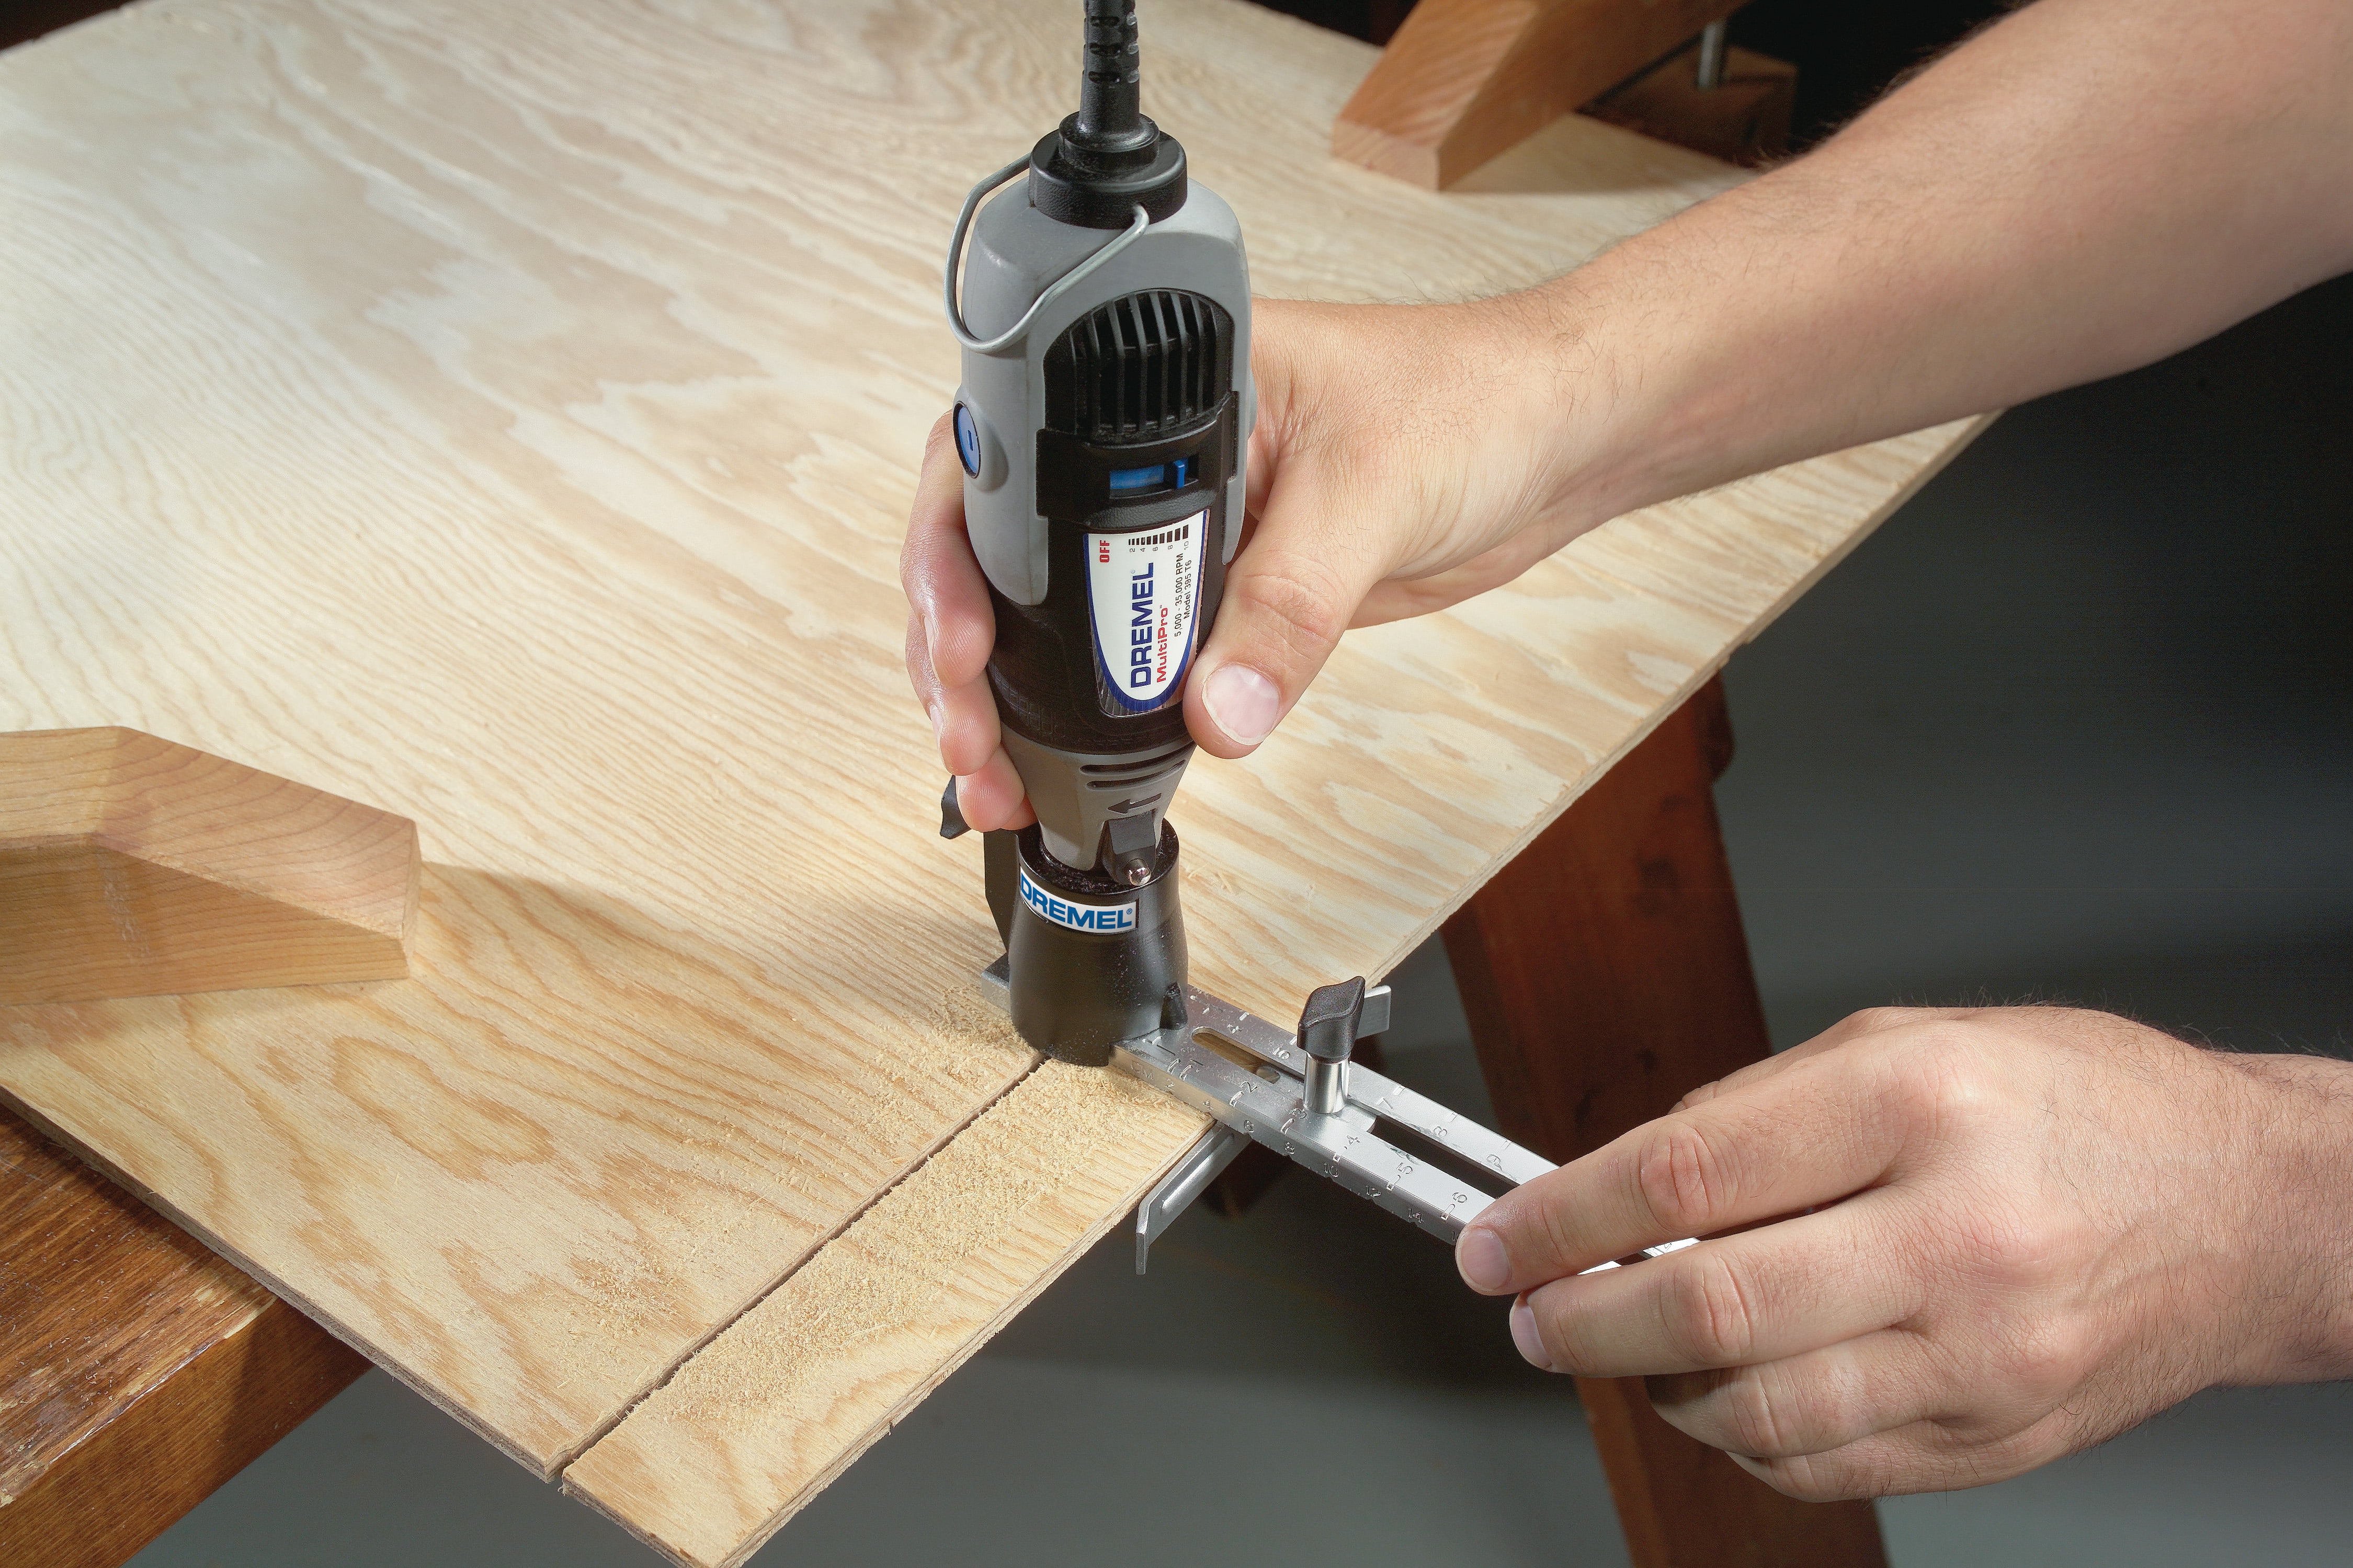 DREMEL Circle Cutter & Straight Edge Guide Test & Review 